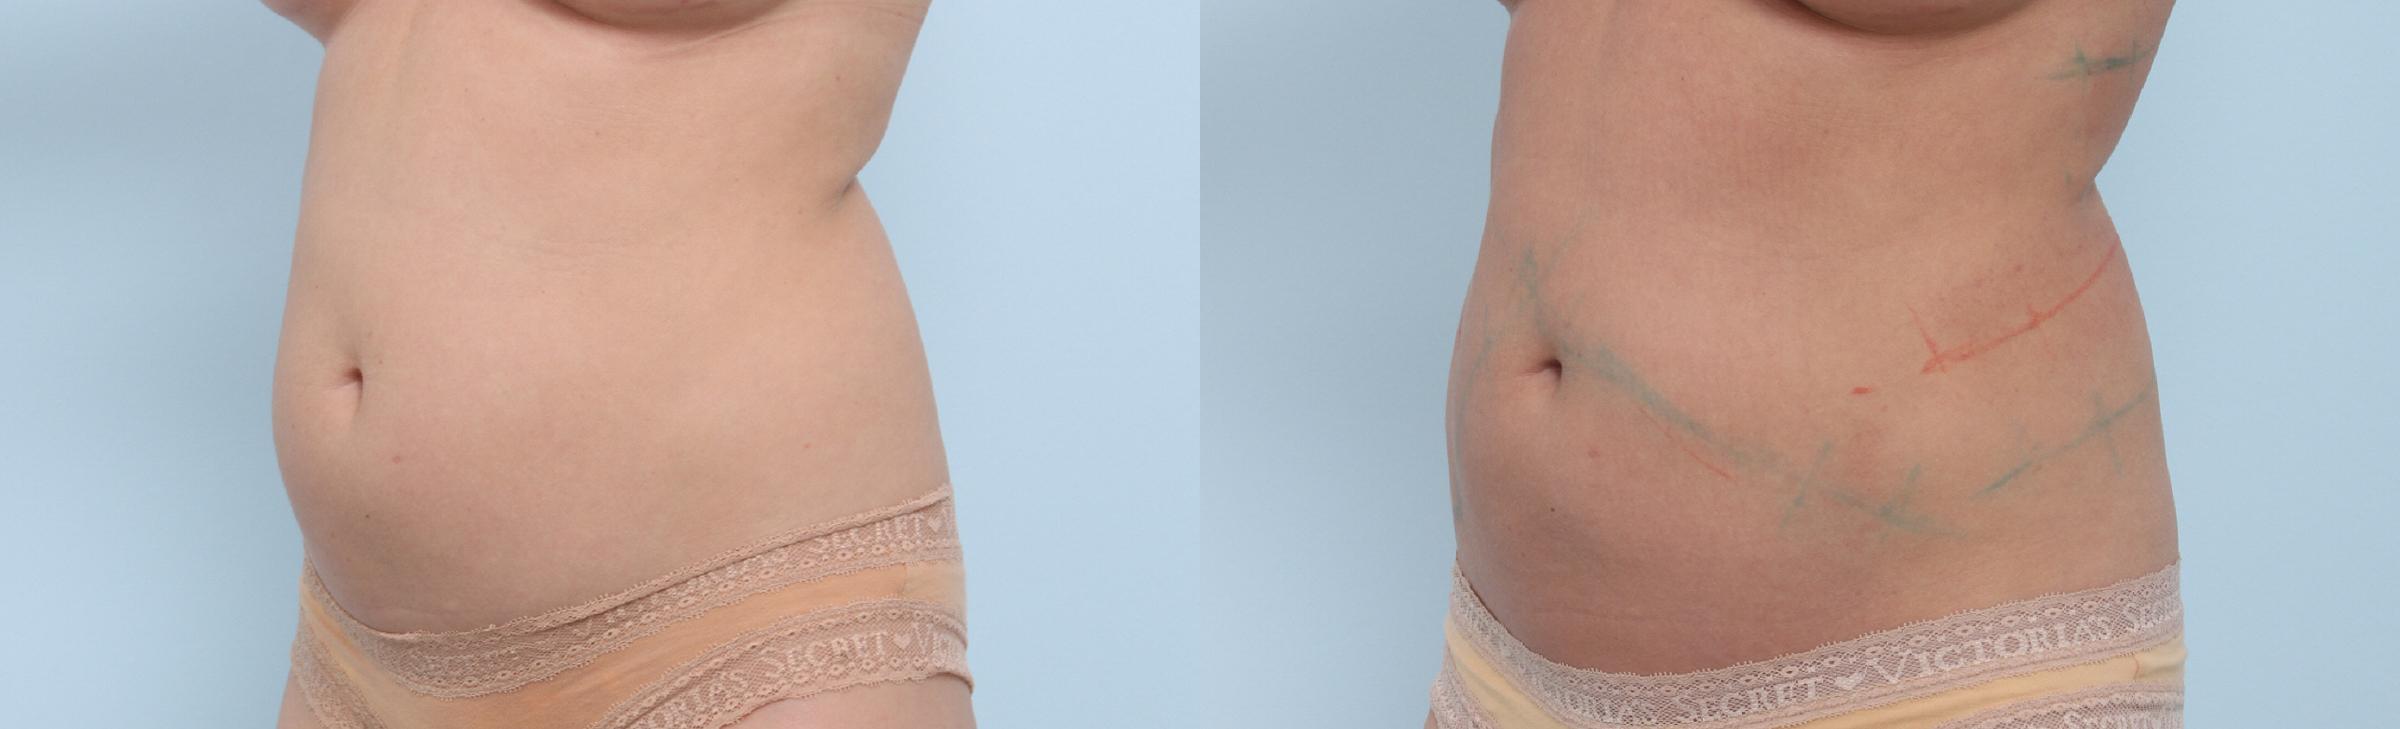  before and after pictures in , , How much does CoolSculpting cost?